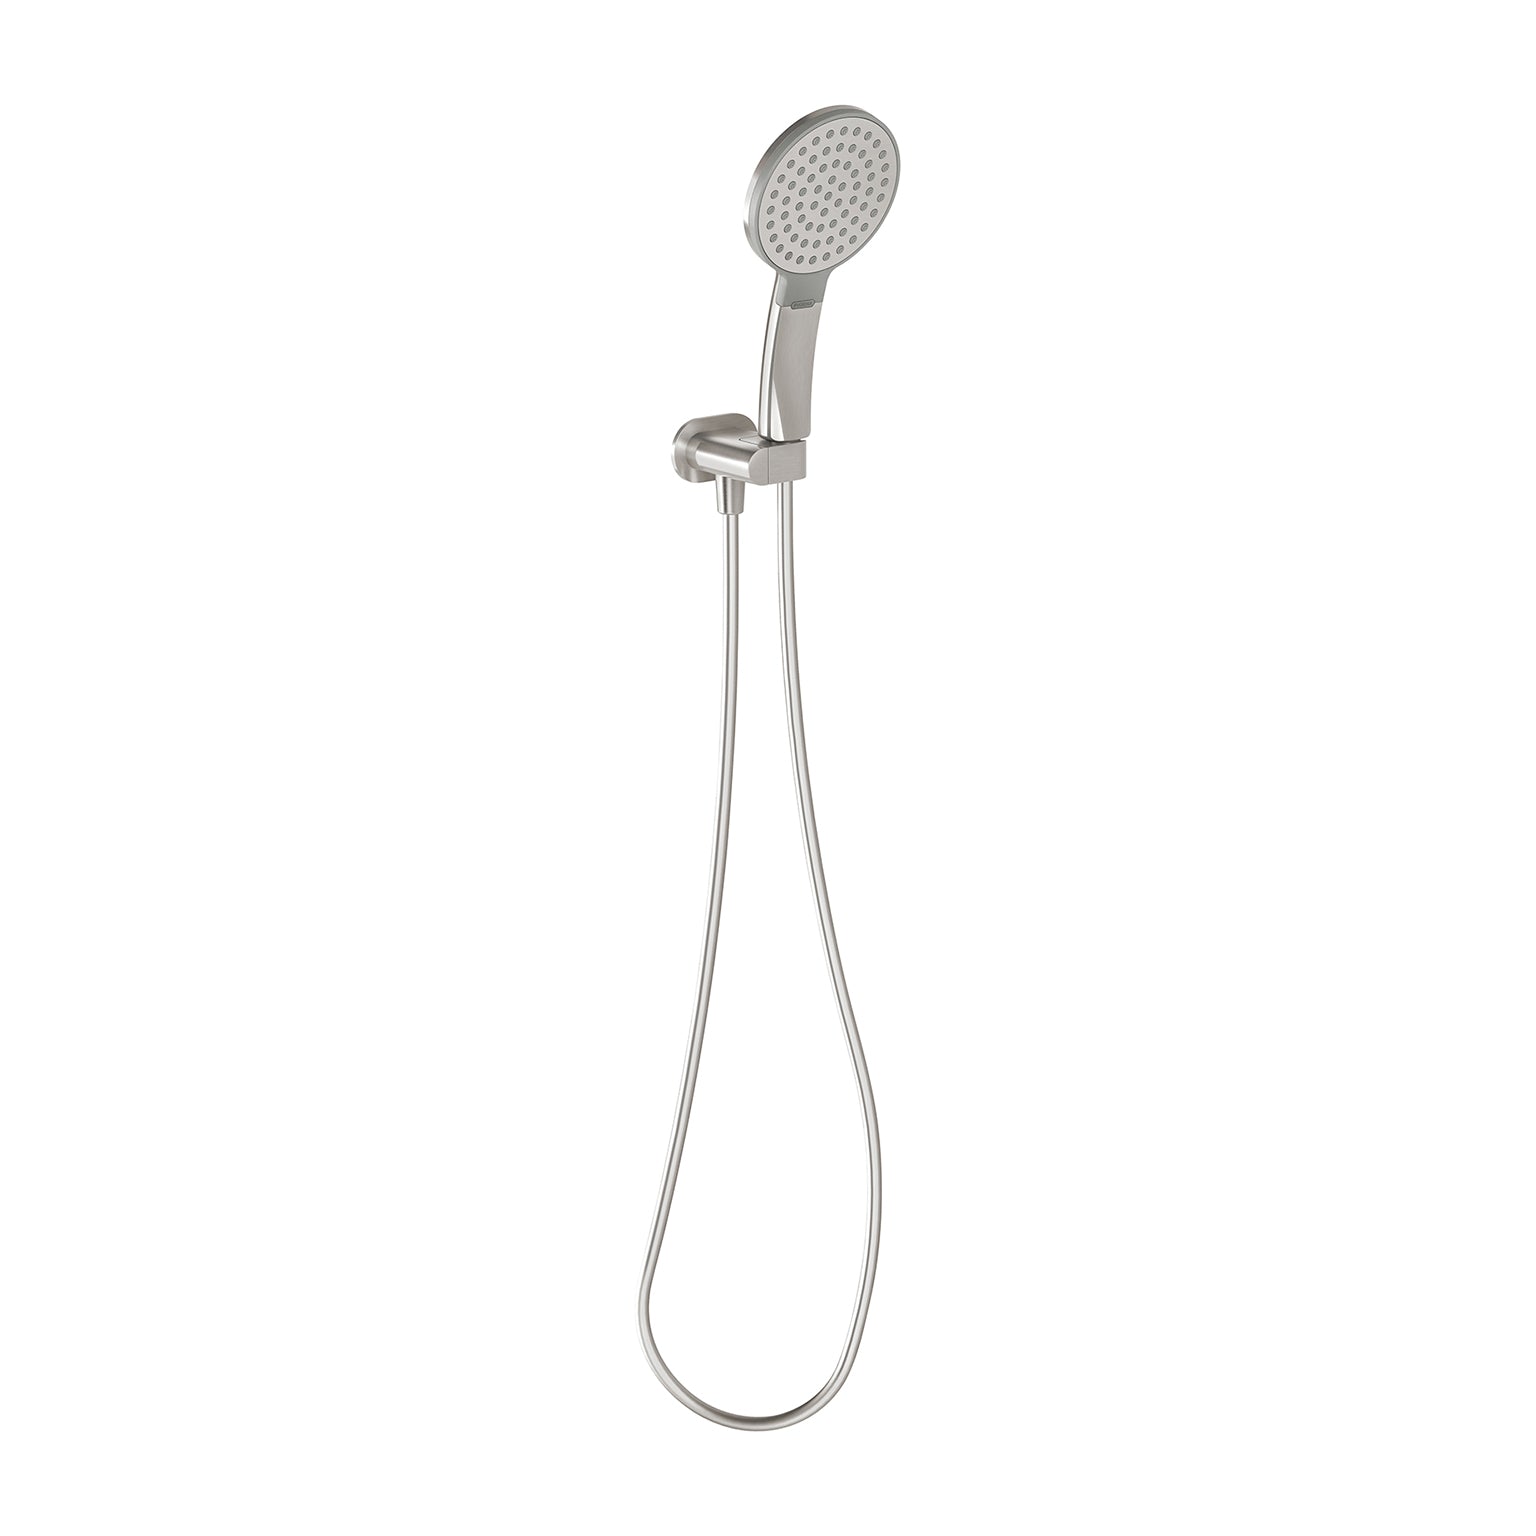 PHOENIX NX QUIL HAND SHOWER BRUSHED NICKEL